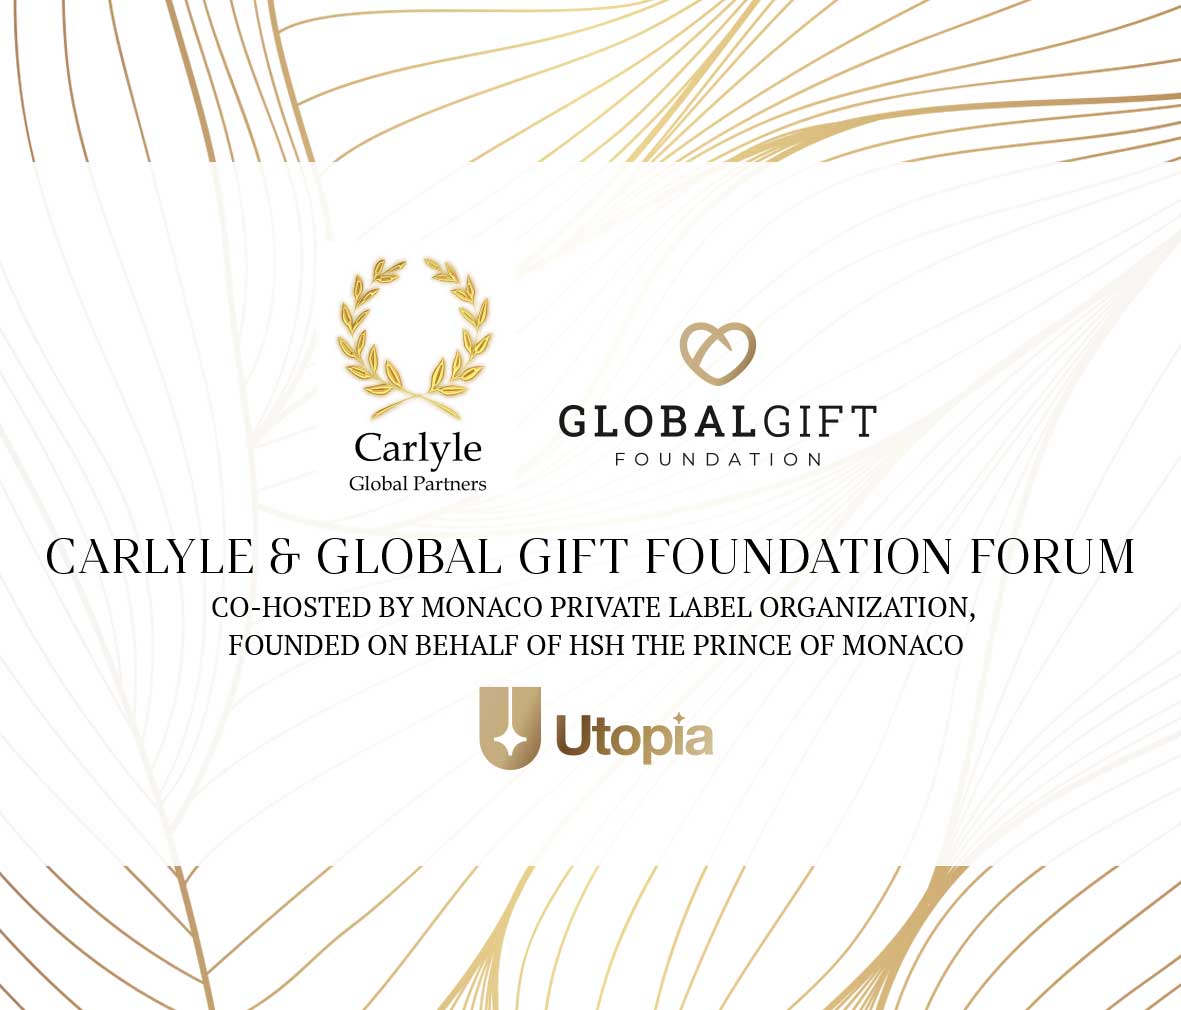 Carlyle & Global Gift Foundation  Forum, Co-Hosted by H.S.H. Prince Albert II’s Monaco Private Label 